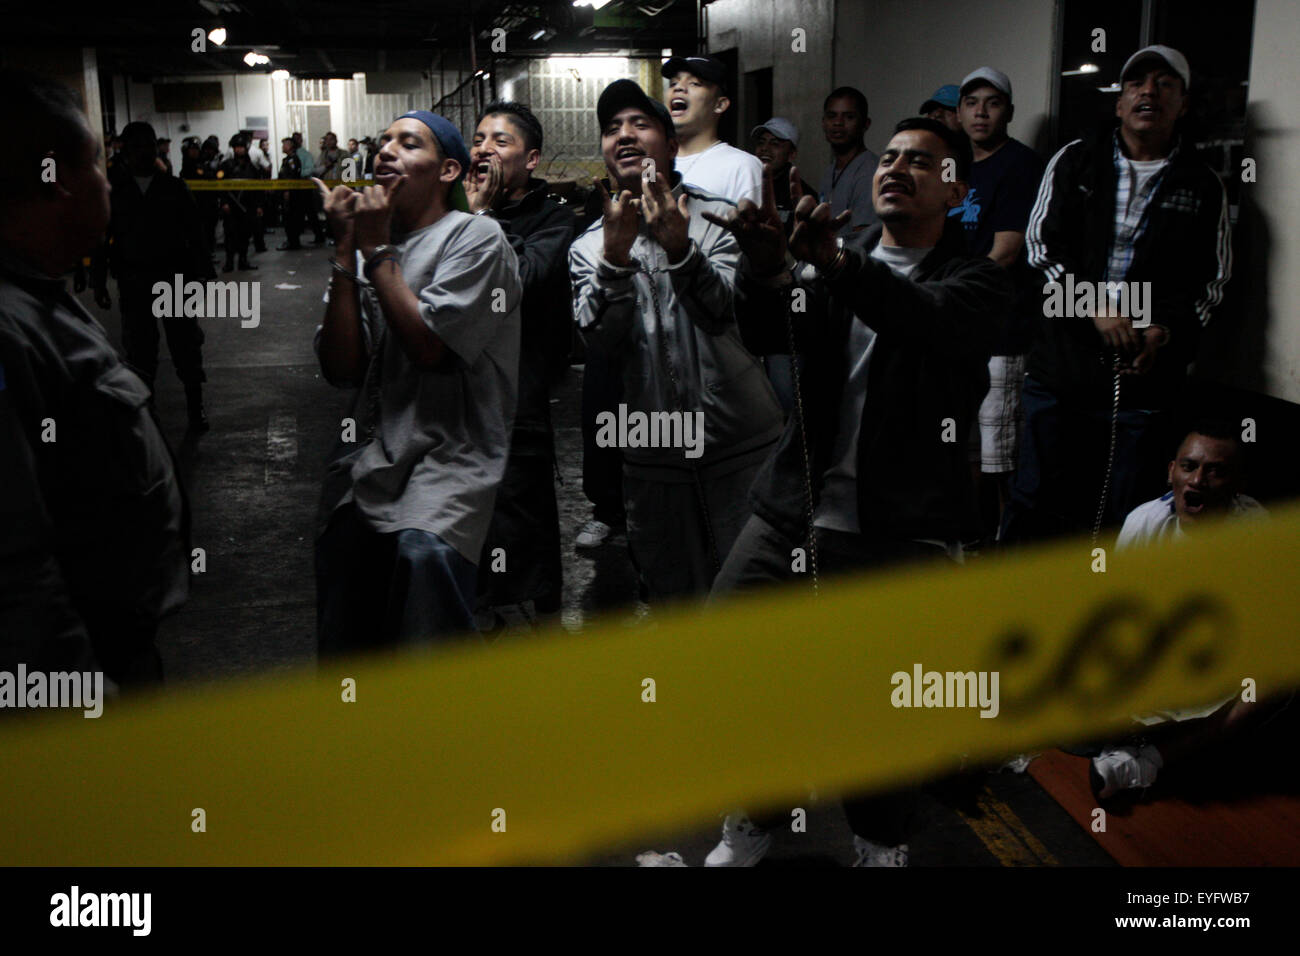 Ciudad De Guatemala, Guatemala. 28th July, 2015. A group of suspected gang members are kept in the lockup of the Tower of Courts in Guatemala City, capital of Guatemala, on July 28, 2015. According to local press, three suspected members of criminal gang Mara Salvatrucha were shot during a fight that occurred in a lockup that is located in the basement of the Tower of Courts. © Stringer/Xinhua/Alamy Live News Stock Photo